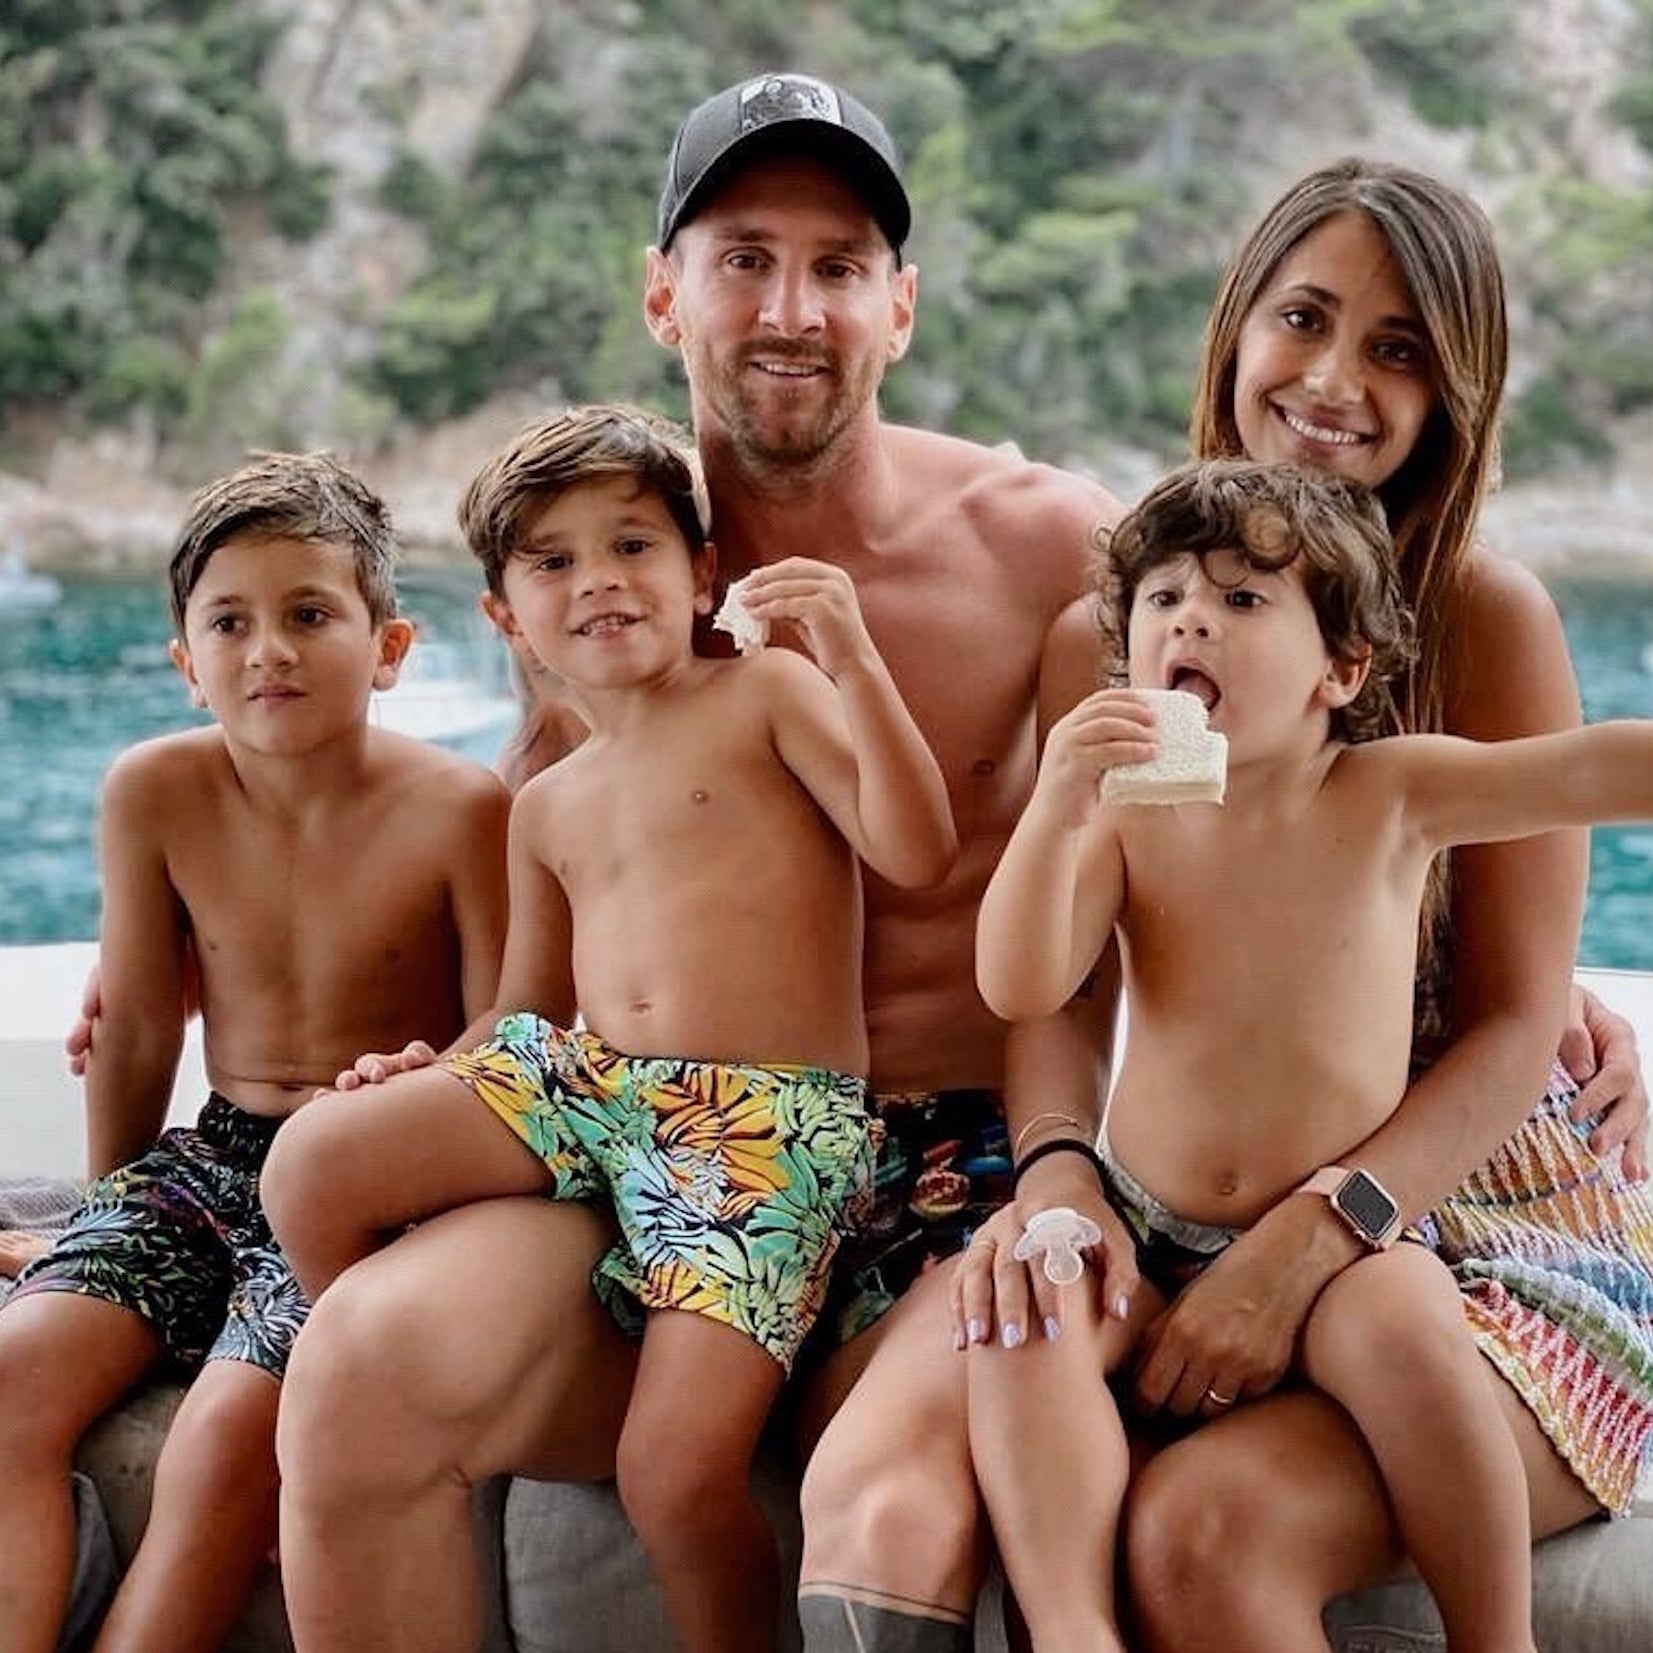 Kwade trouw ga verder fundament How Many Kids Does Lionel Messi Have? | POPSUGAR Family